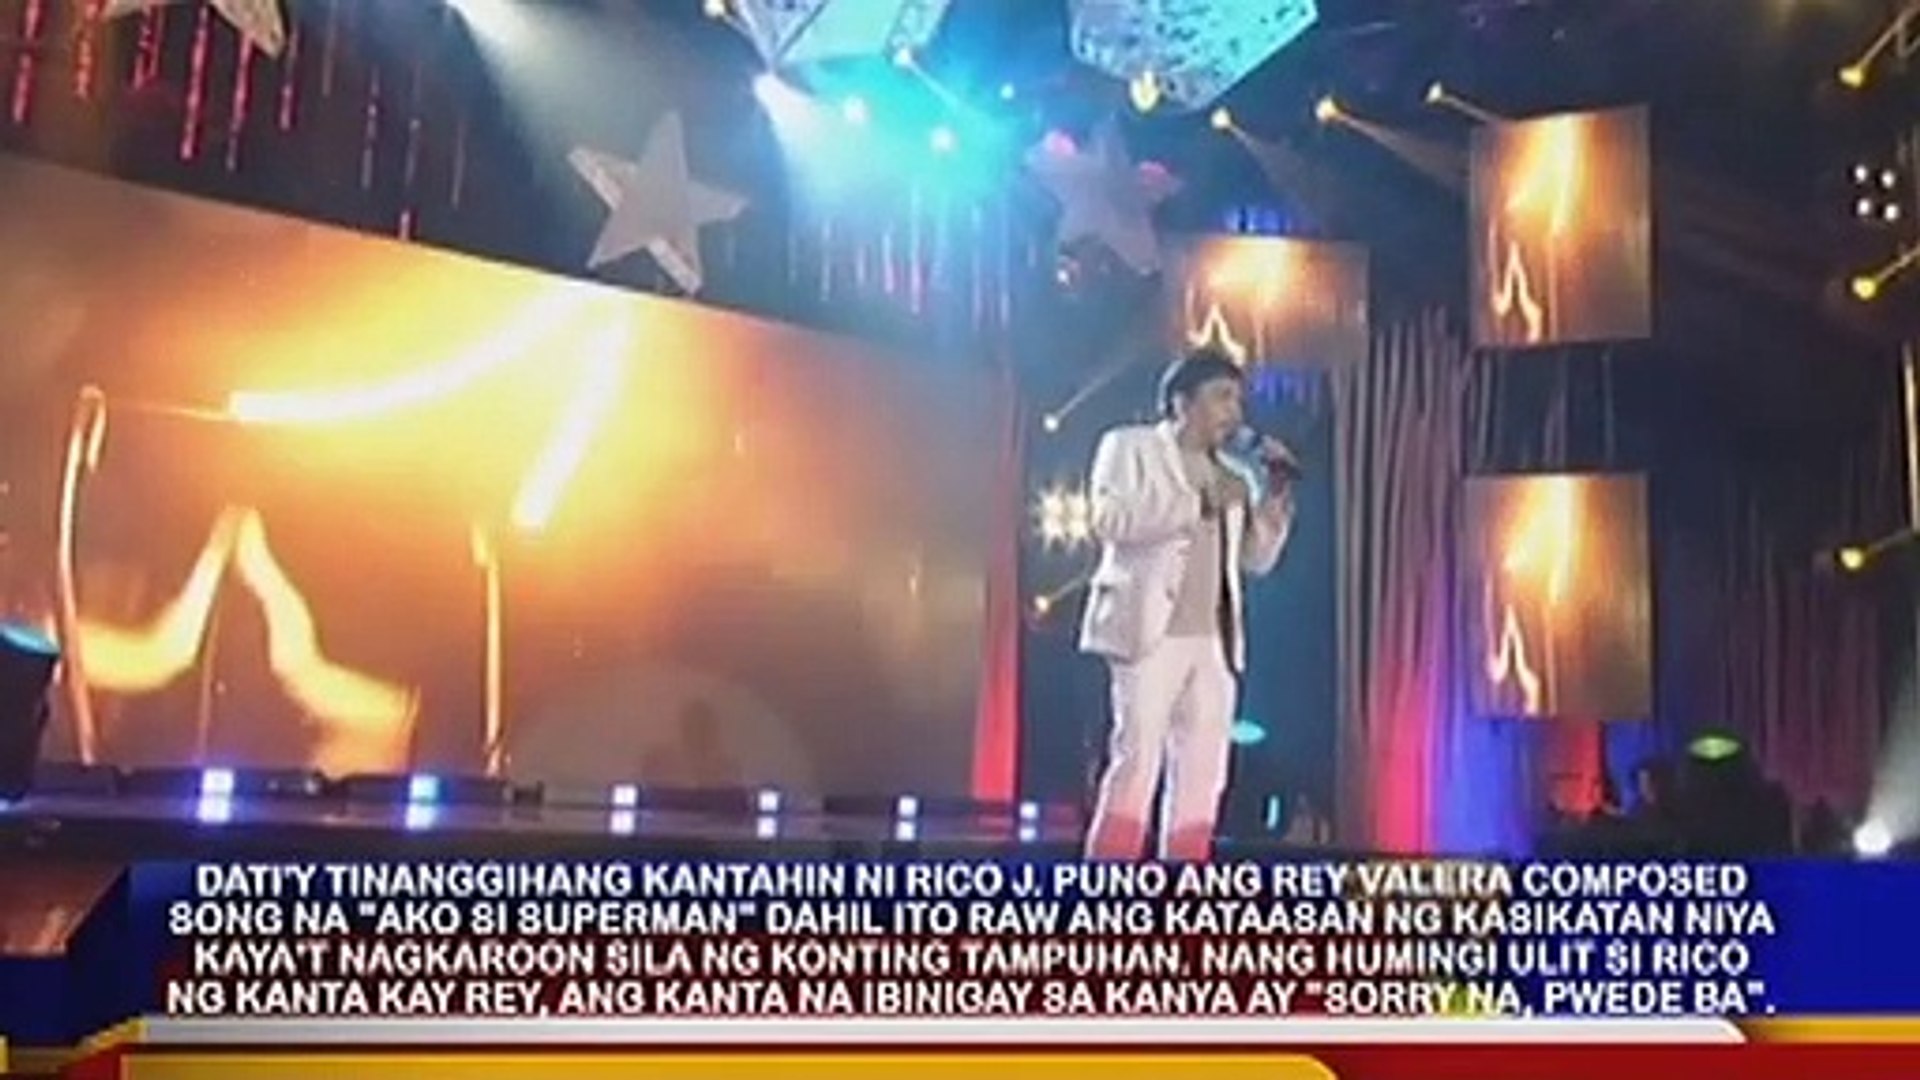 OPM ICON: The Music Of Rico J Puno